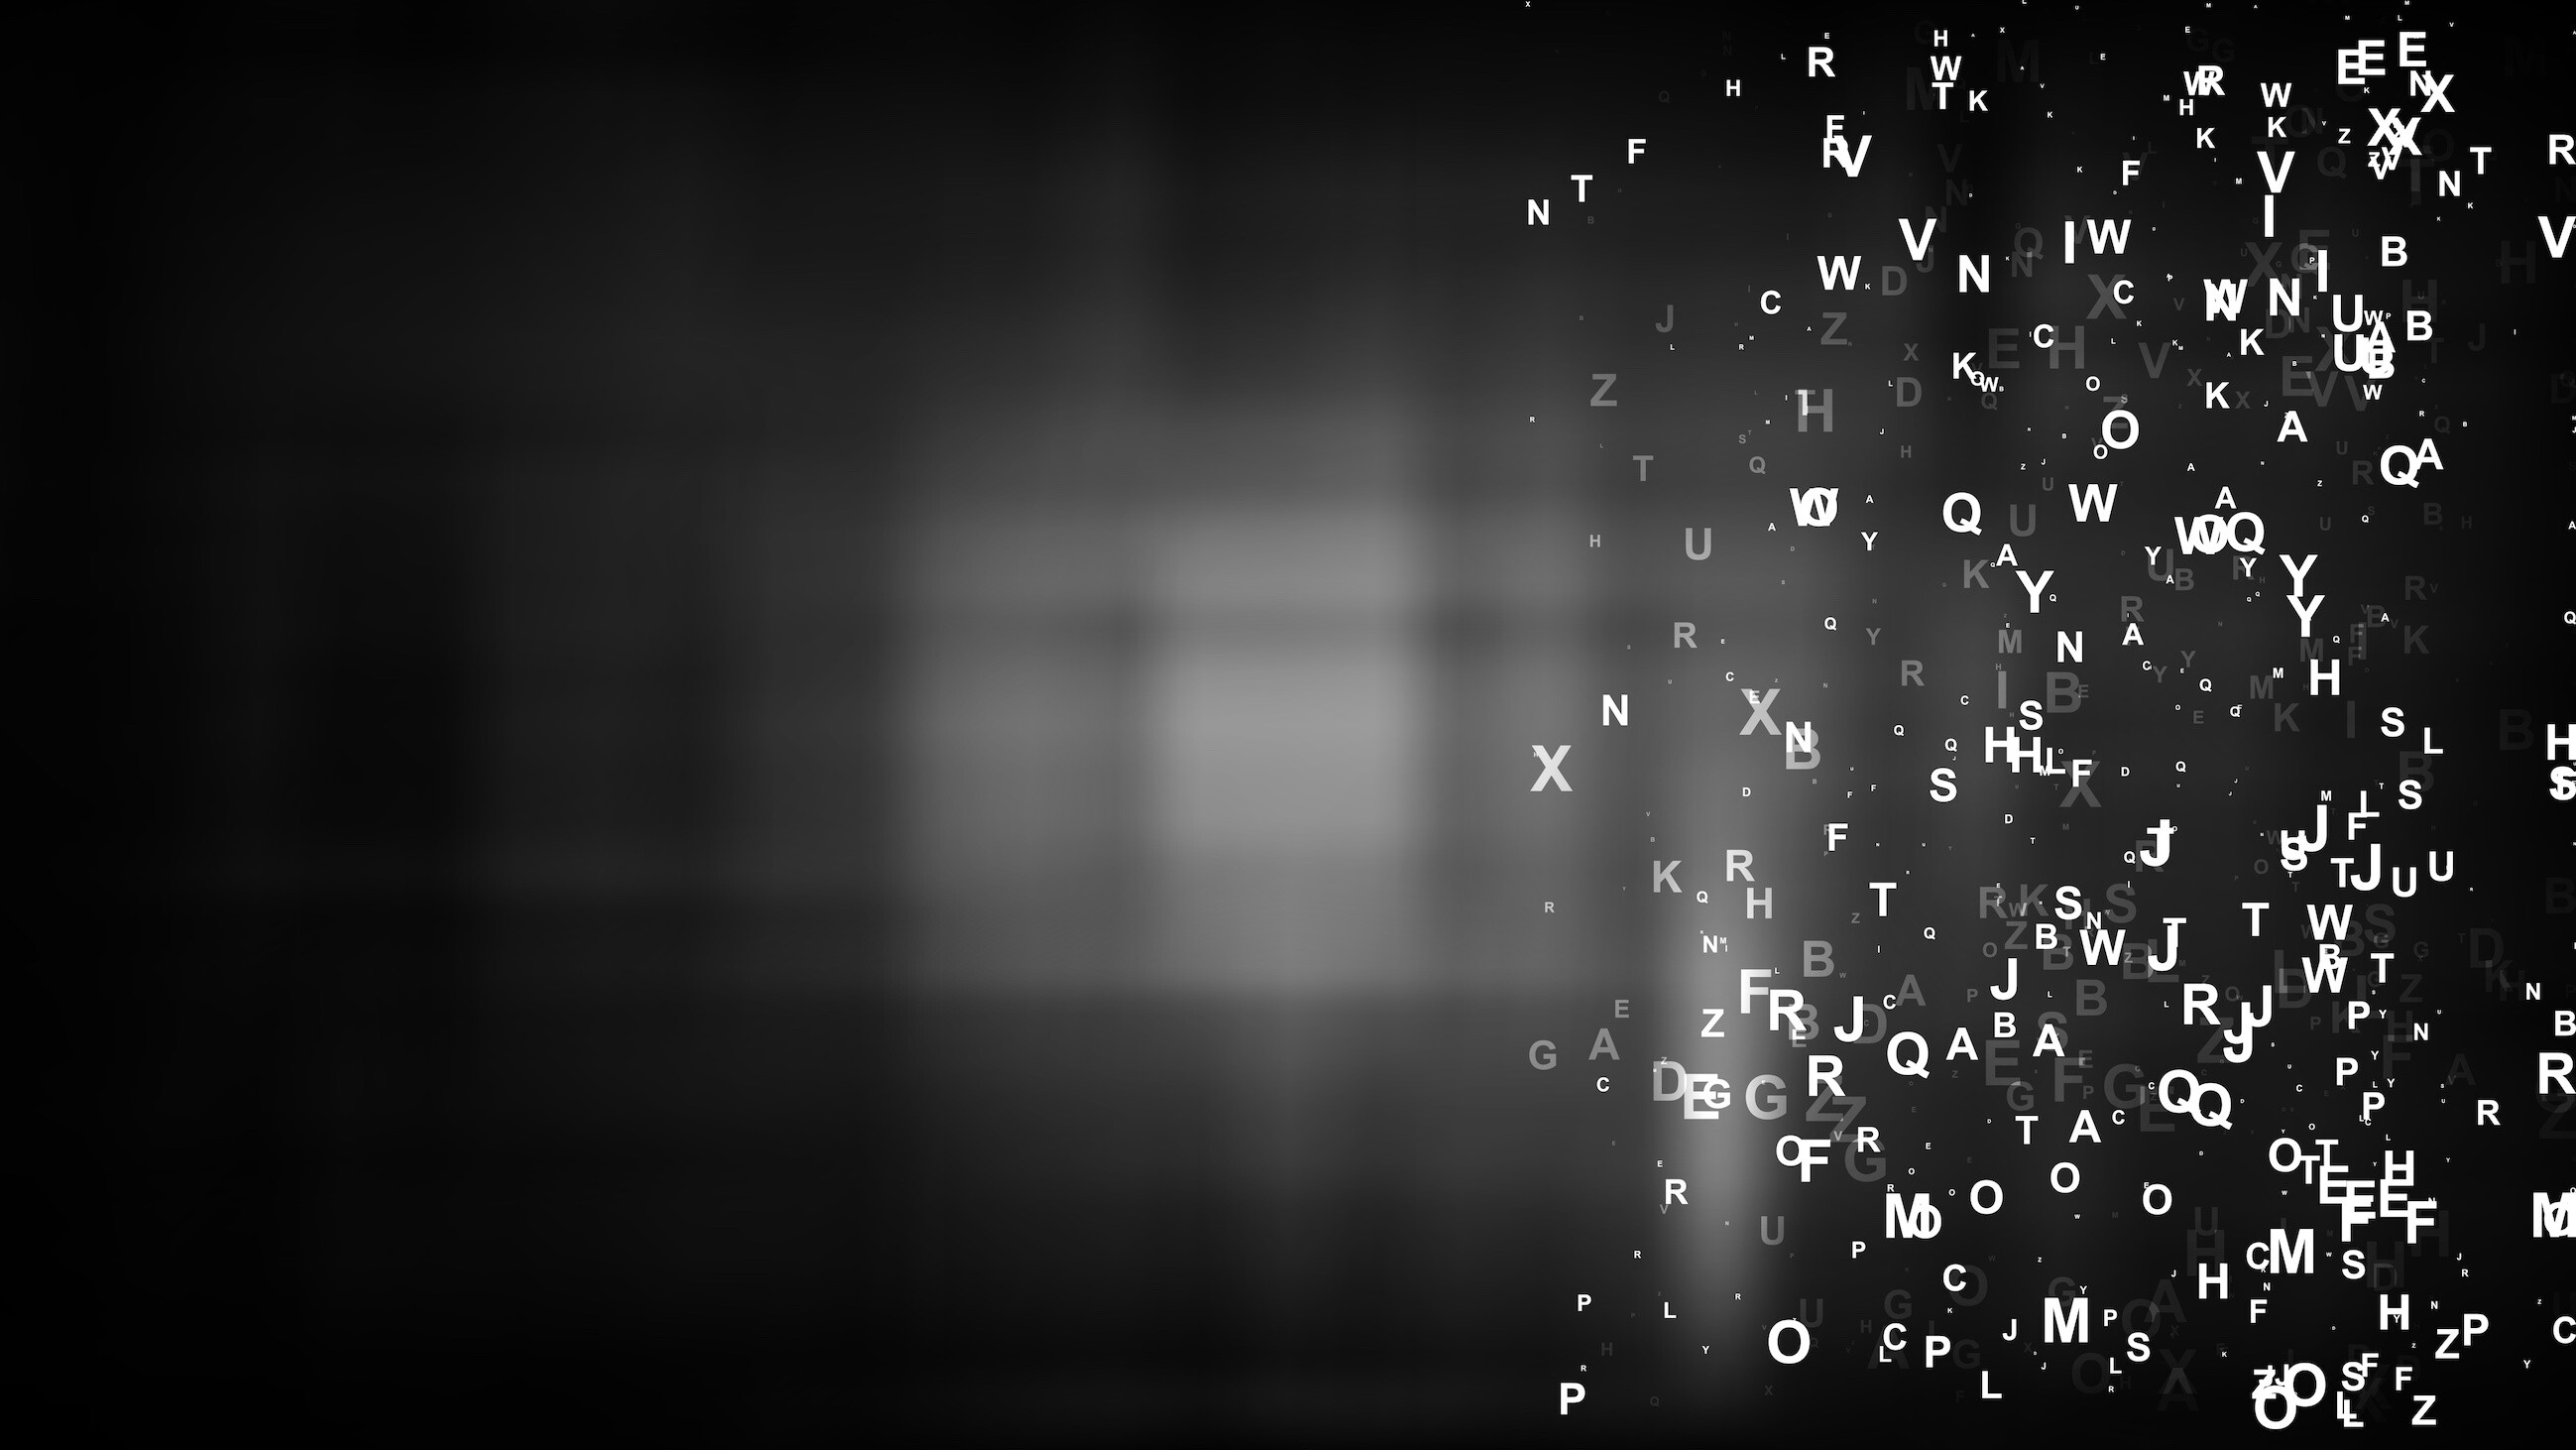 A picture of white letters scattered on a black background